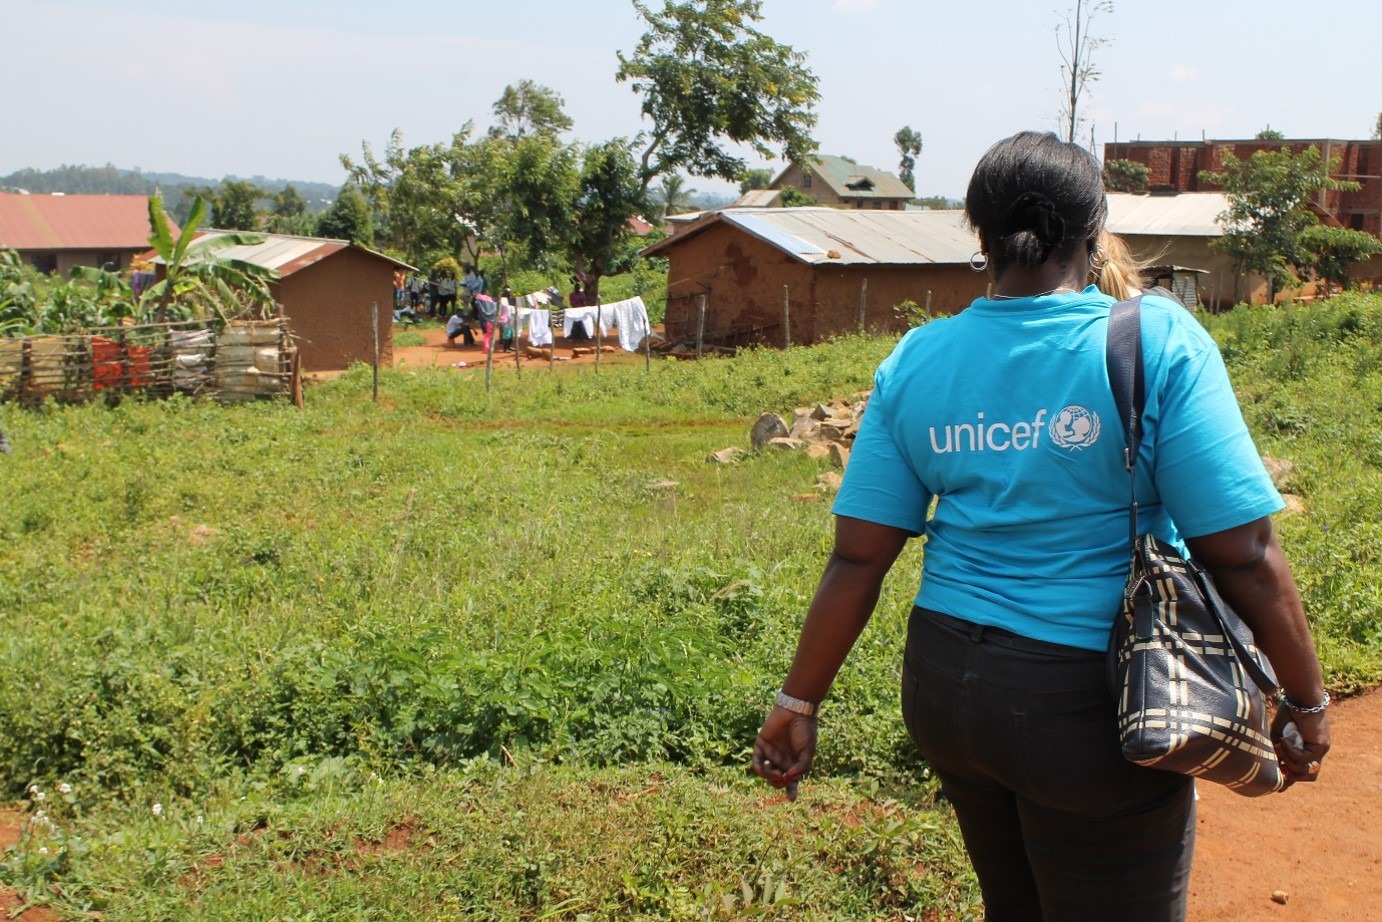 UNICEF workers visit site of Ebola case in DRC